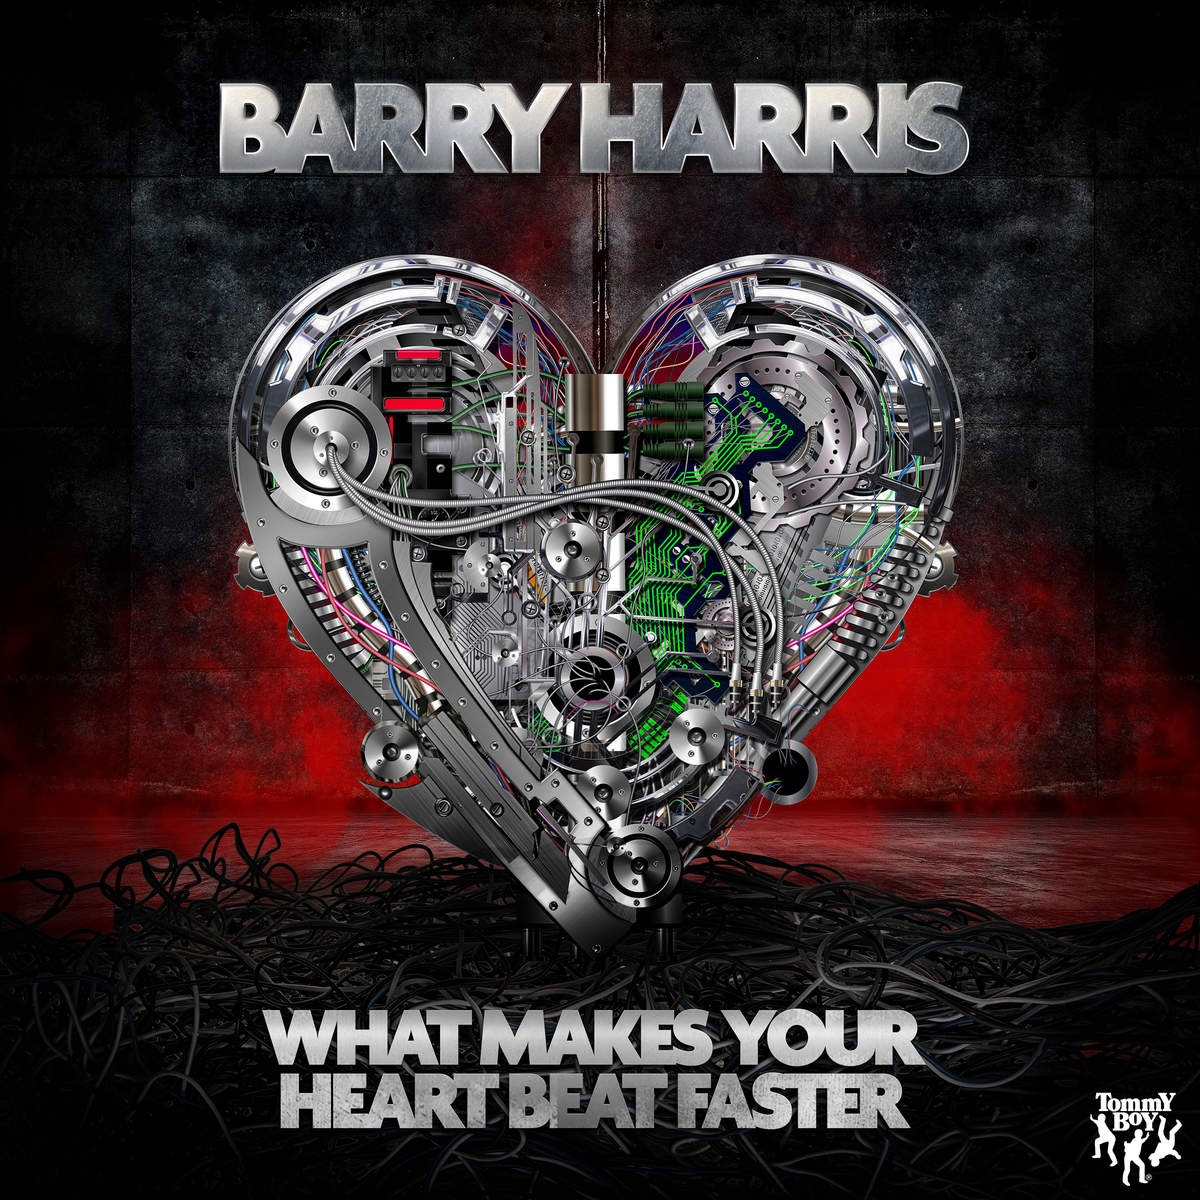 What Makes Your Heartbeat Faster (Toy Armada & DJ GRIND Defibrillator Mix)